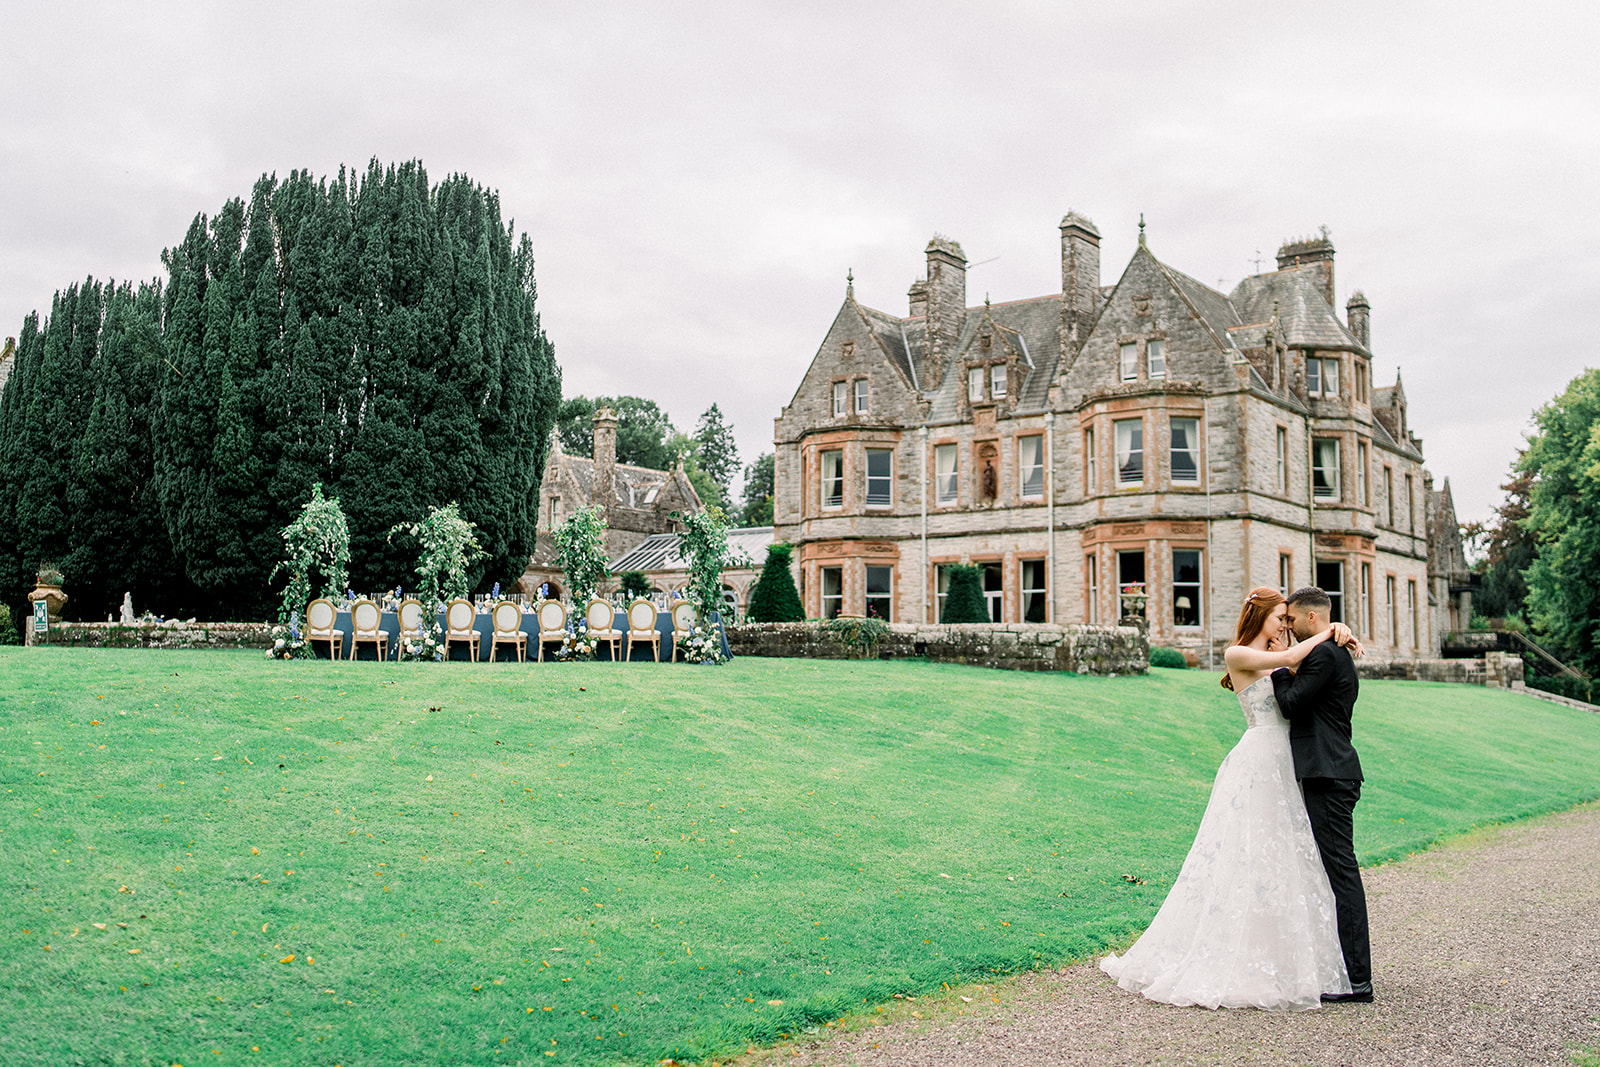 Newlyweds walking together at Castle Leslie, embodying the journey of a destination wedding in the Irish countryside.